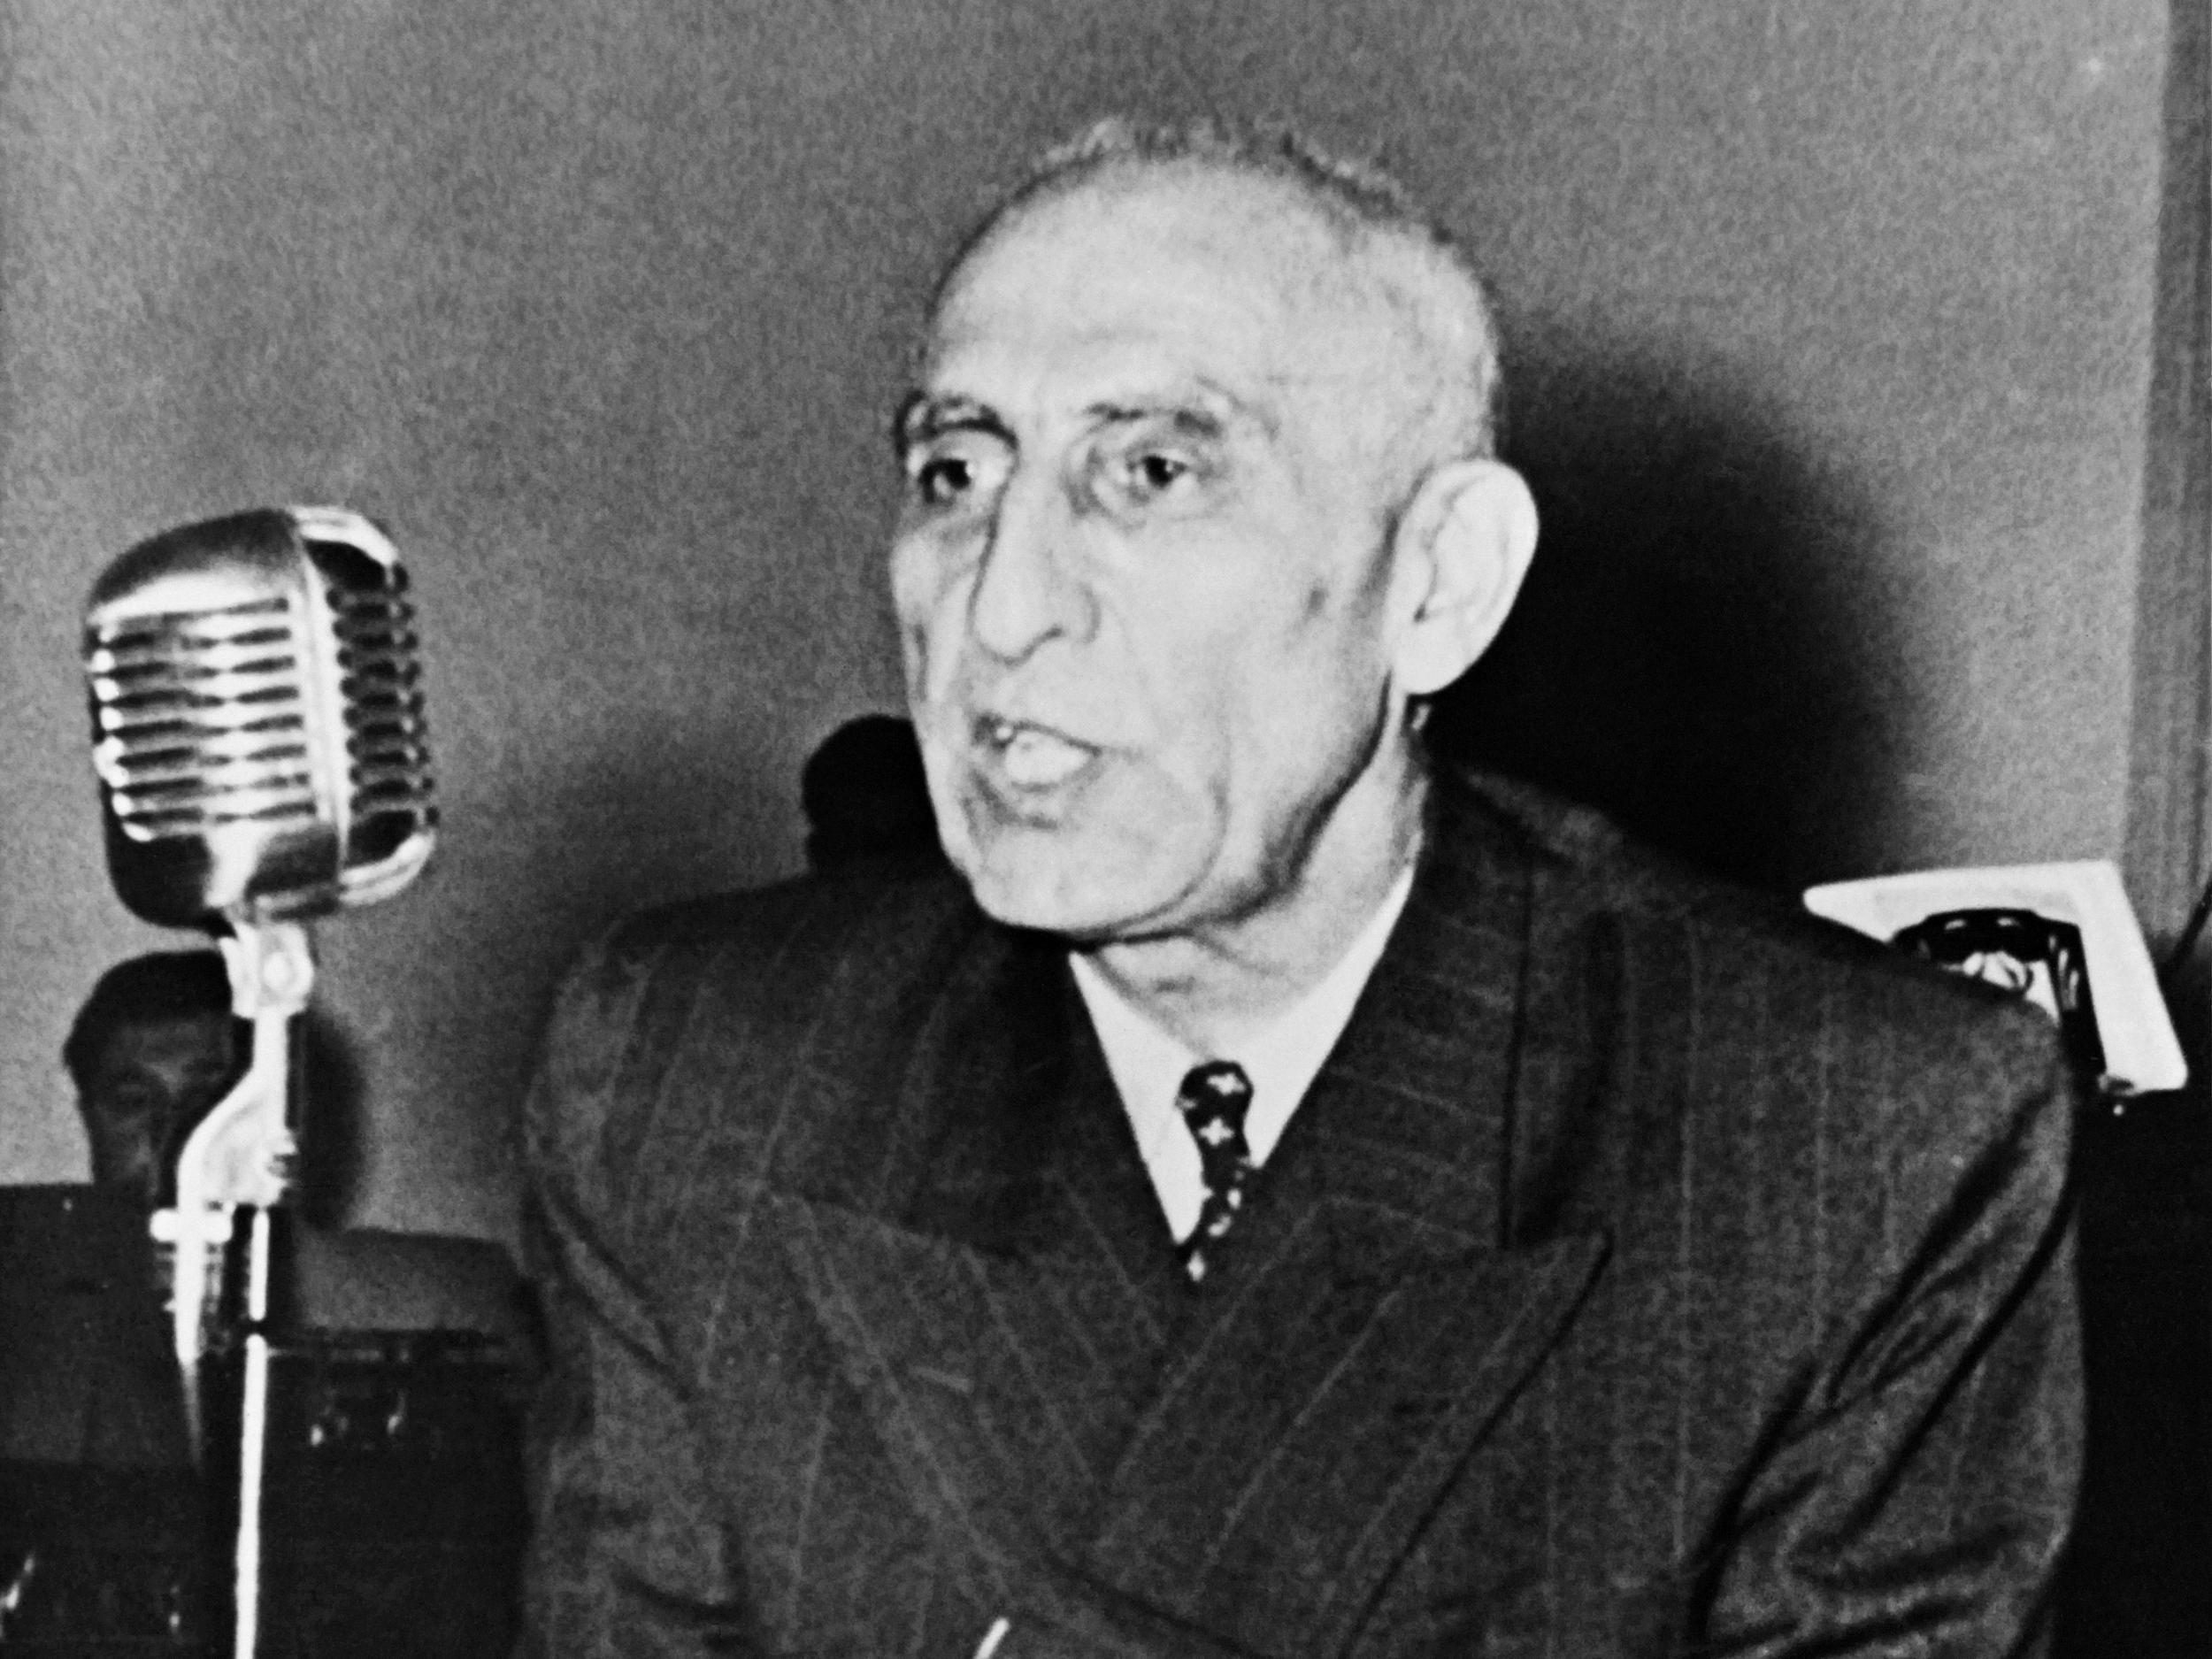 Mossadegh was jailed for three years after his administration was toppled, and then kept under house arrest until his death in 1967